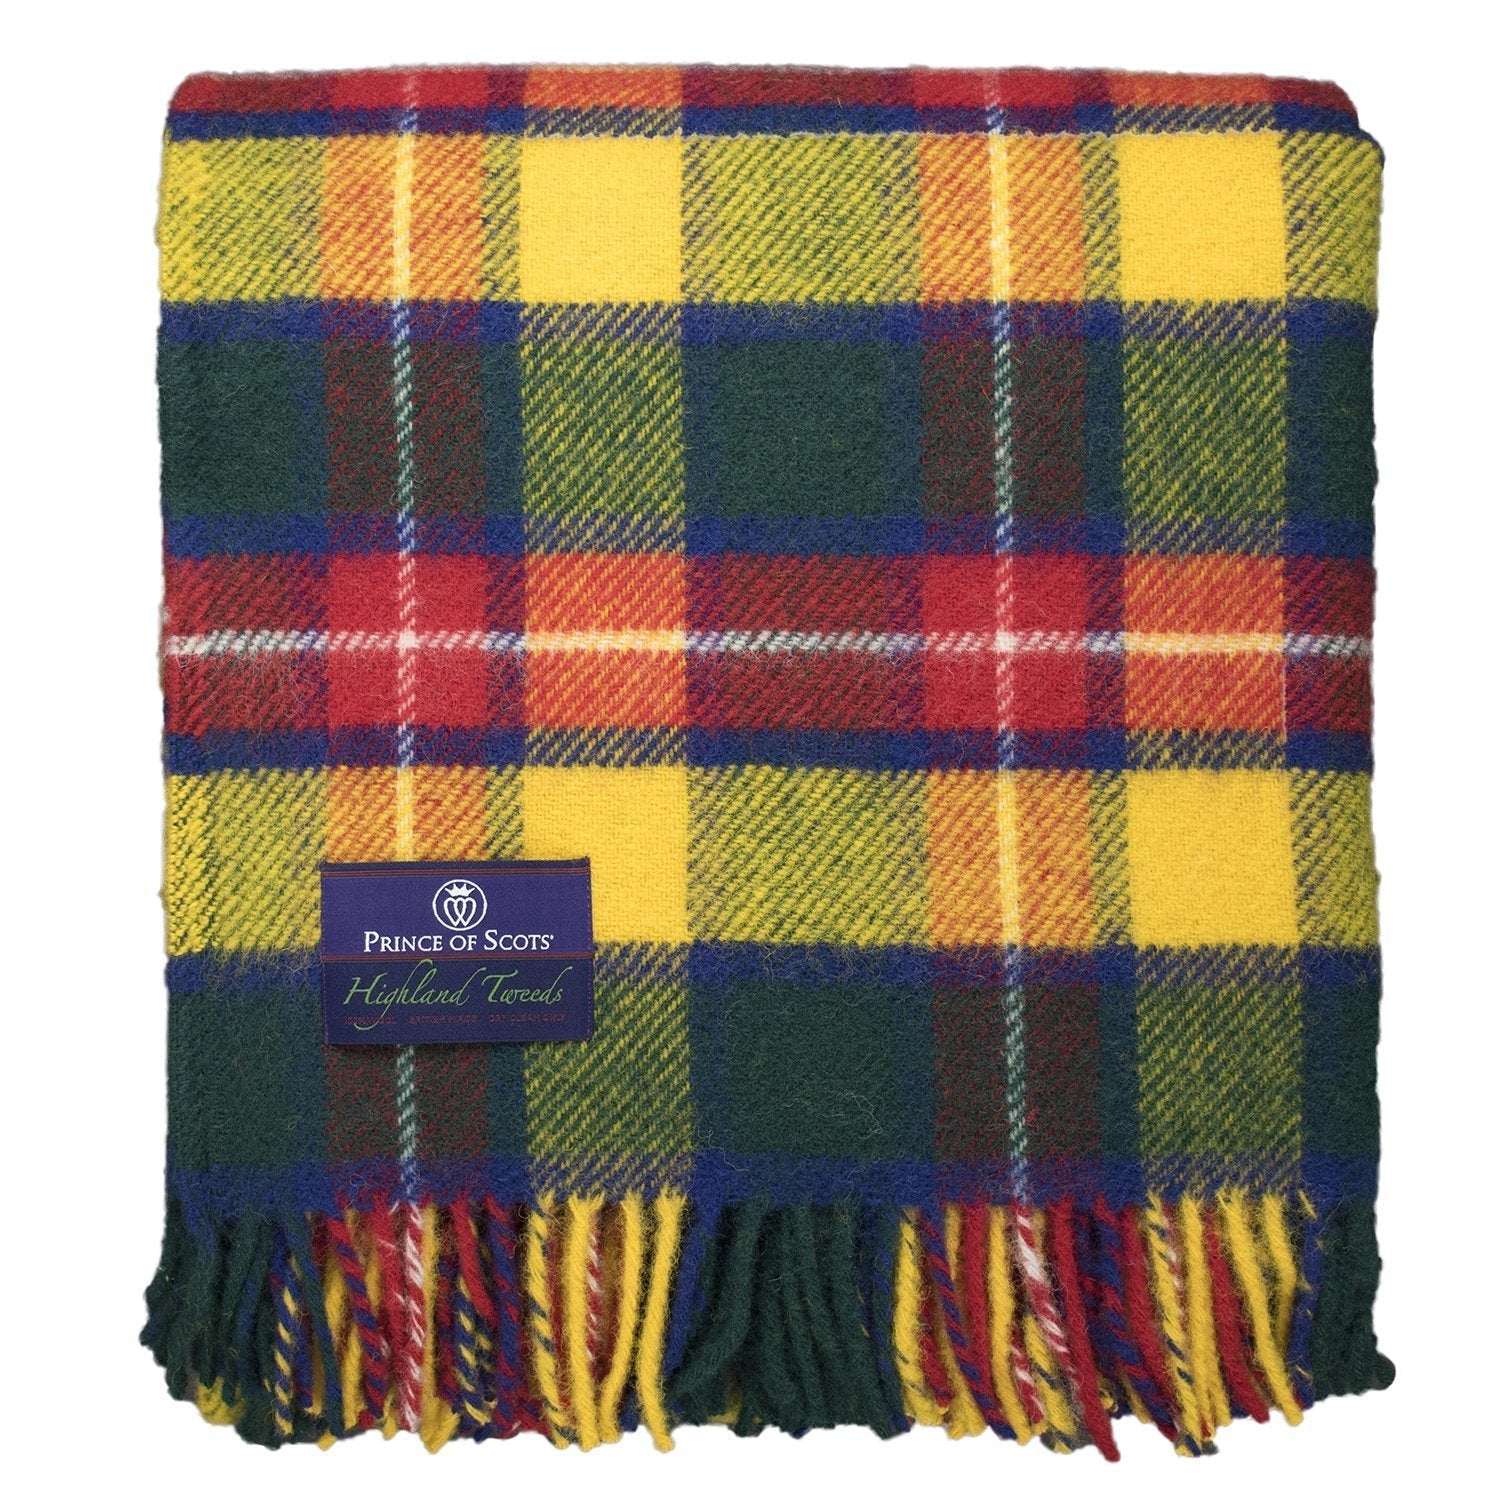 Prince of Scots Highland Tweed Pure New Wool Fluffy Throw ~ Bright Buchanan ~-Throws and Blankets-Prince of Scots-00810032750220-K40050018-004-Prince of Scots